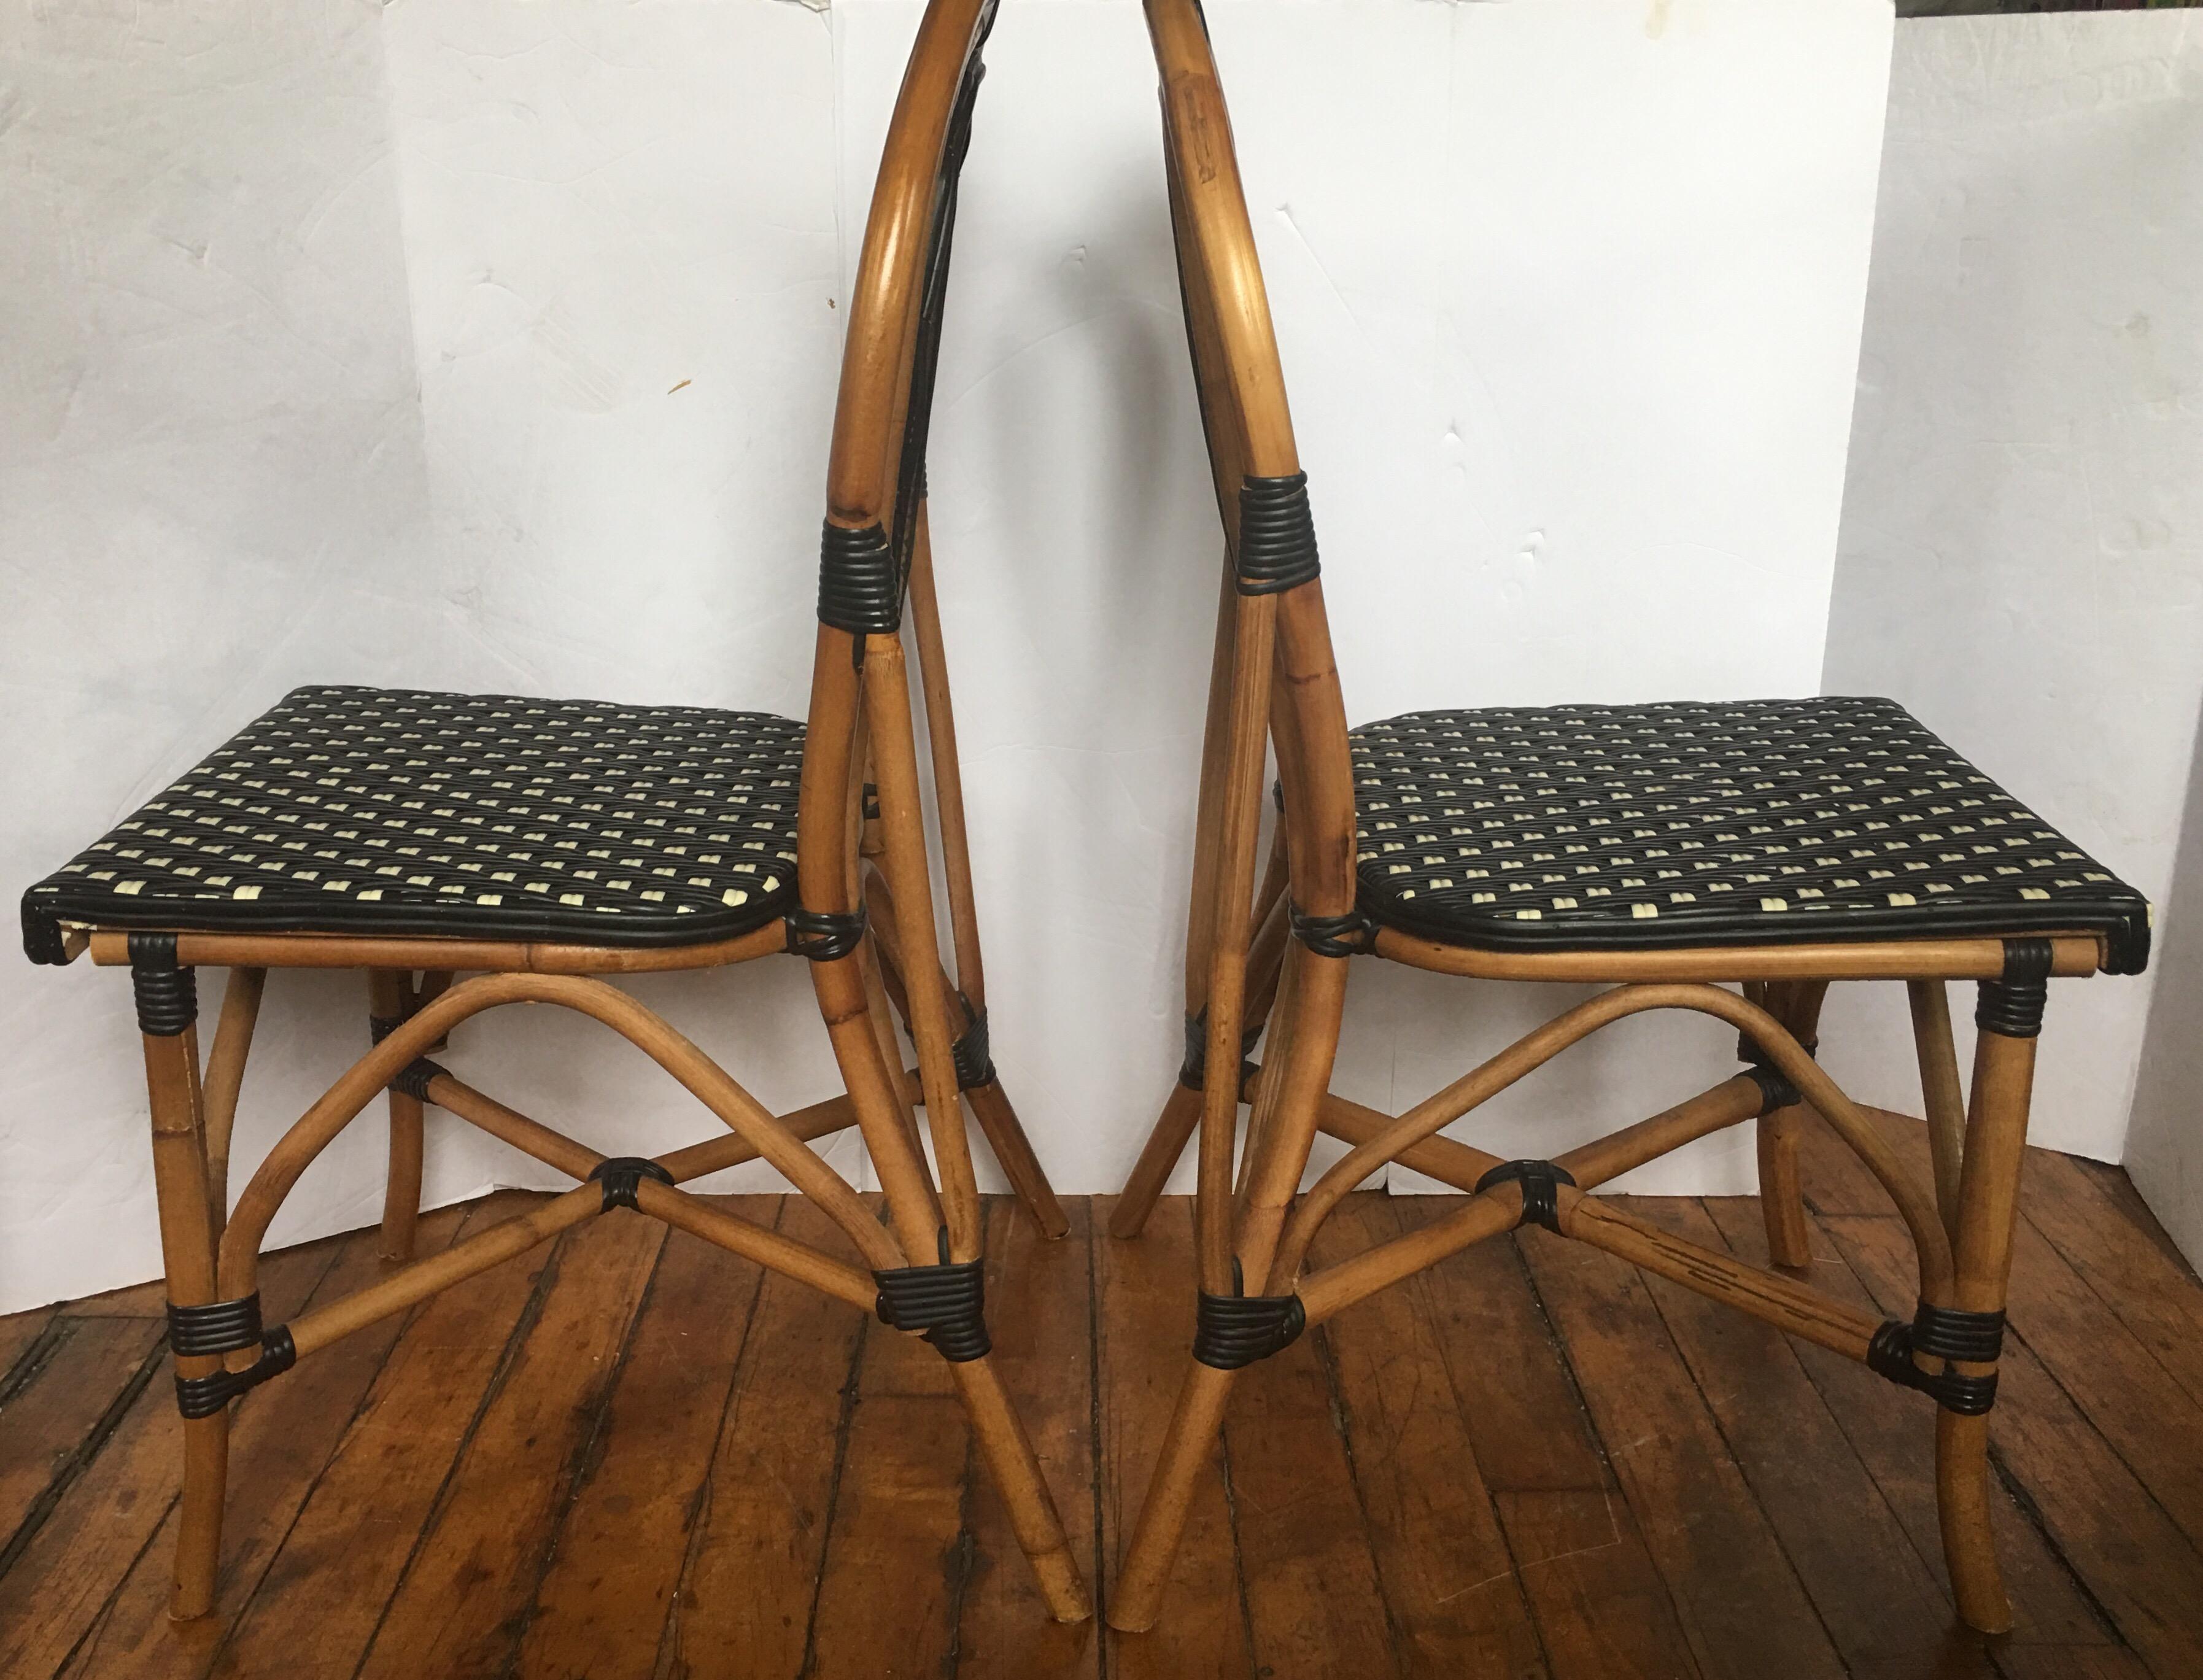 cafe style chairs